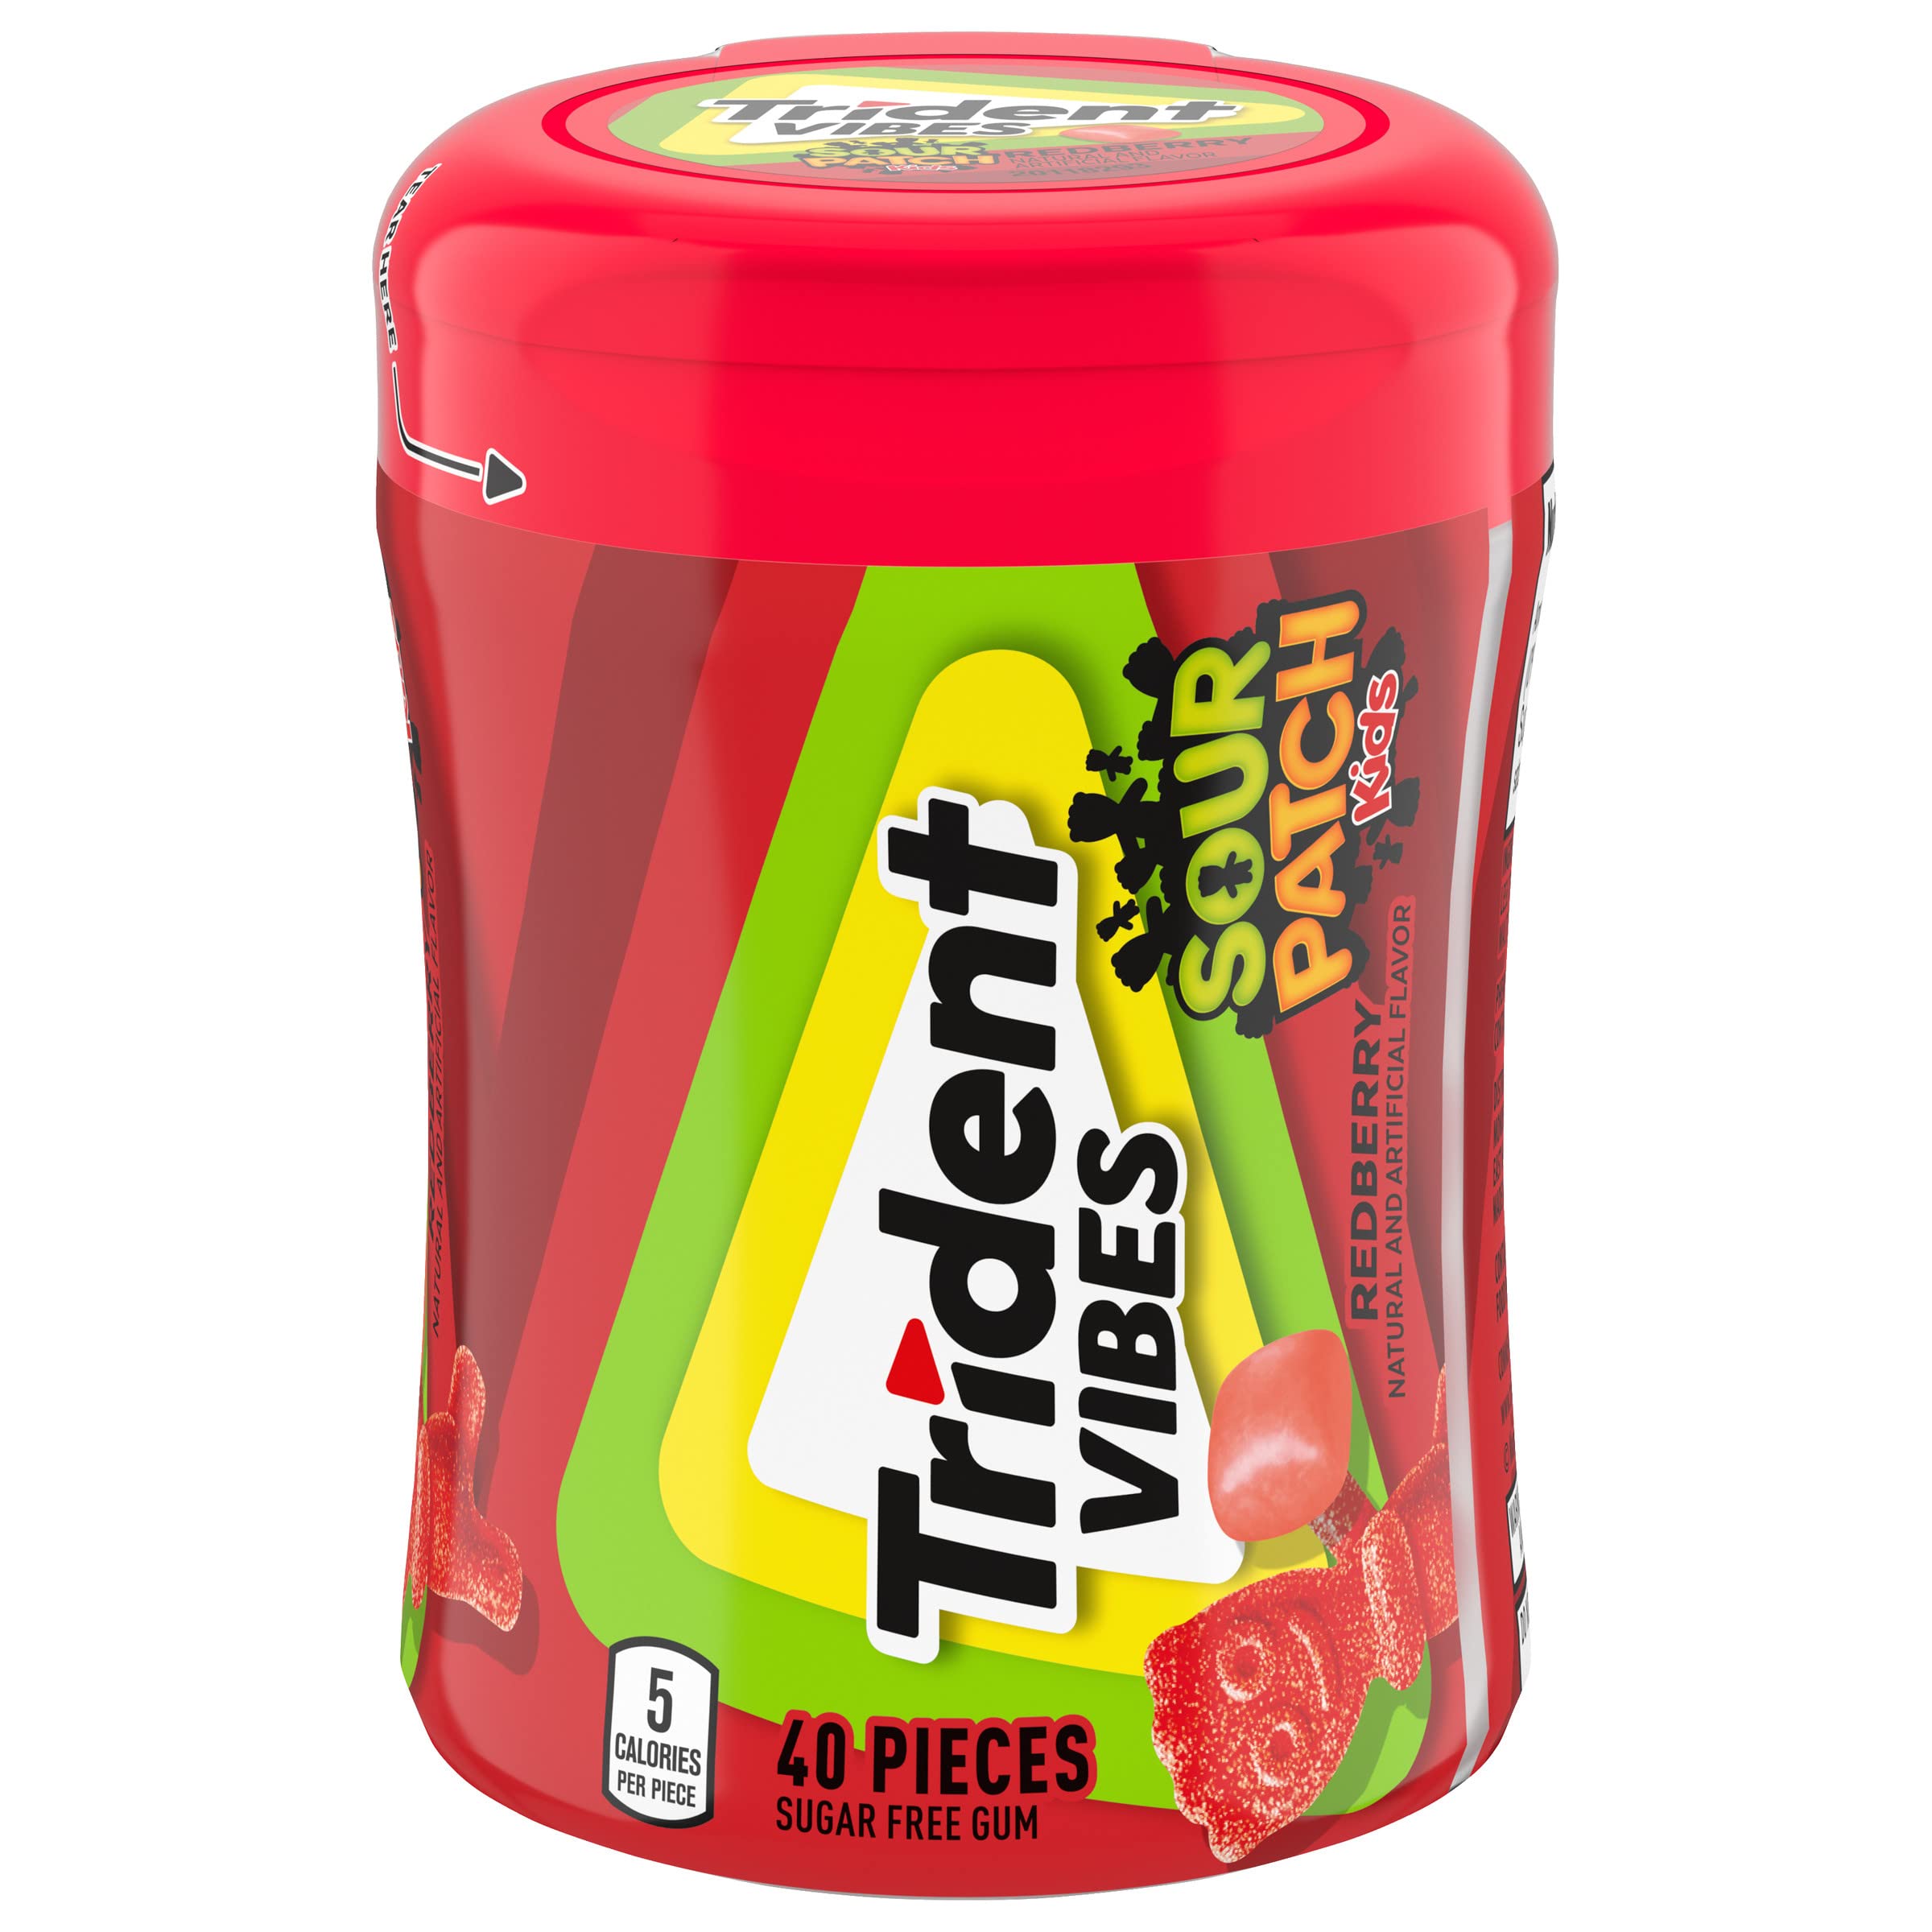 40-Piece Trident Vibes SOUR PATCH KIDS Sugar Free Gum (Redberry or Raspberry) $2.62 w/ S&S + Free Shipping w/ Prime or on $35+